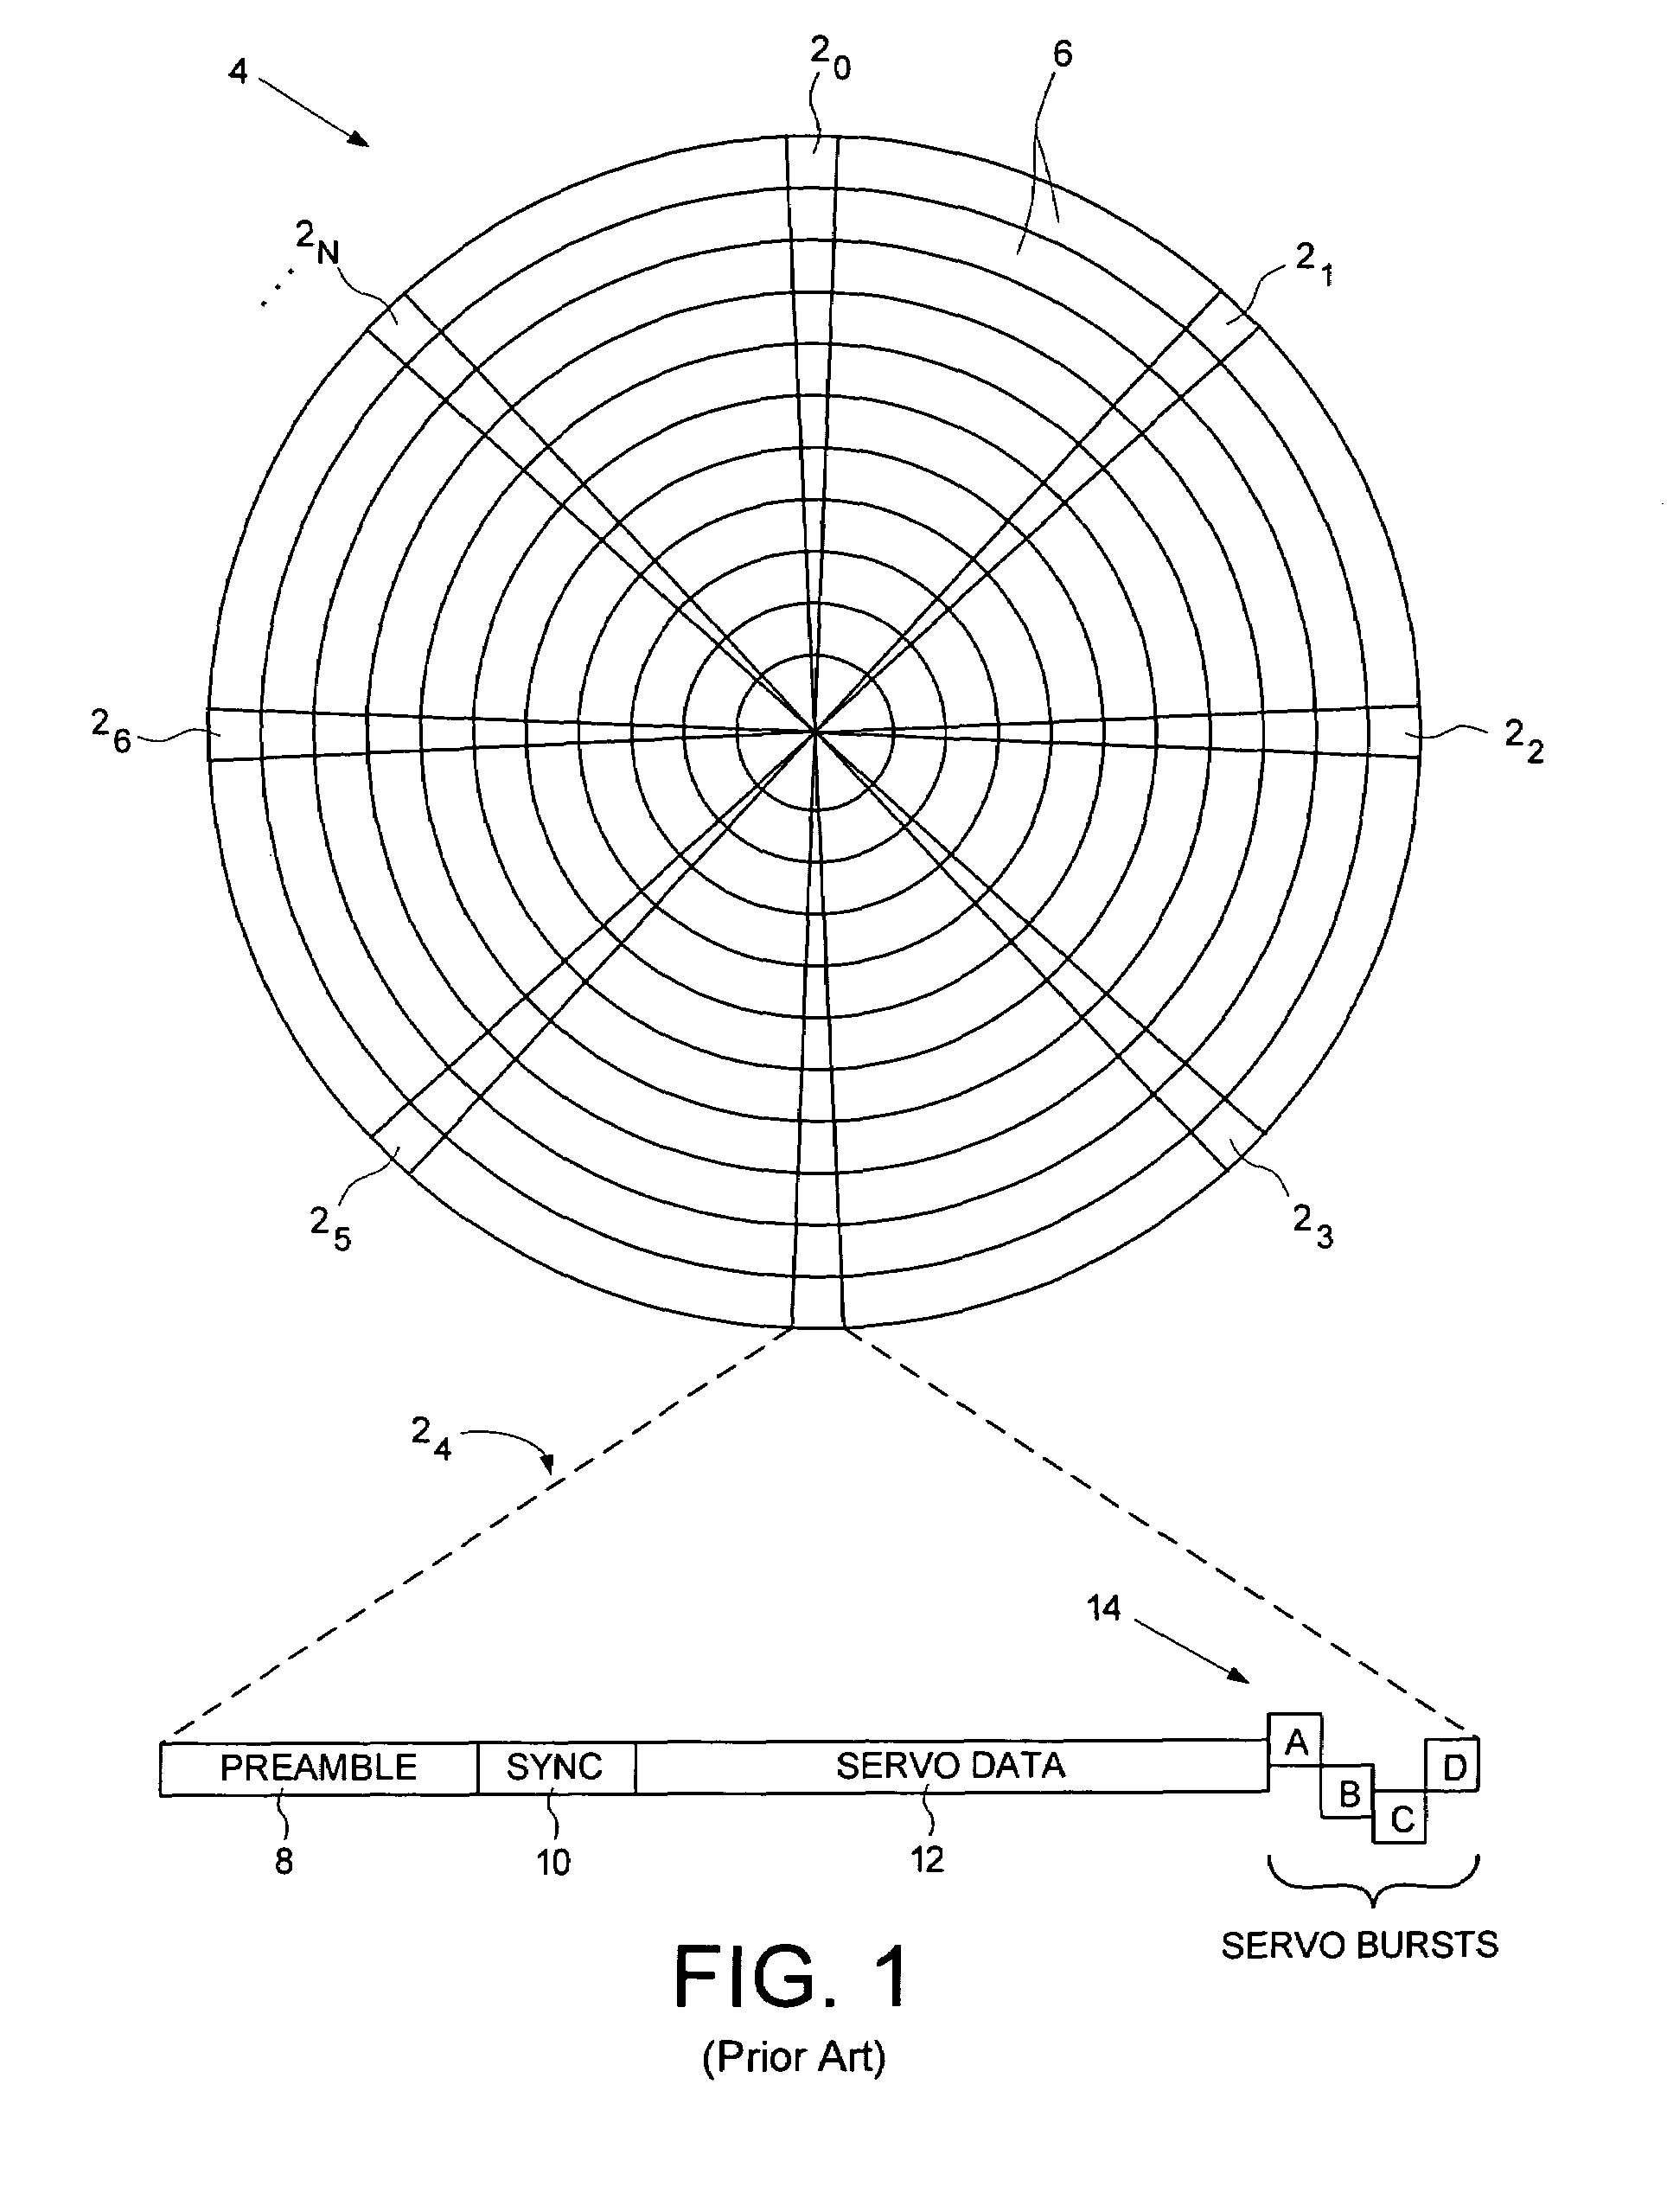 Servo writing a disk drive by integrating a spiral track read signal